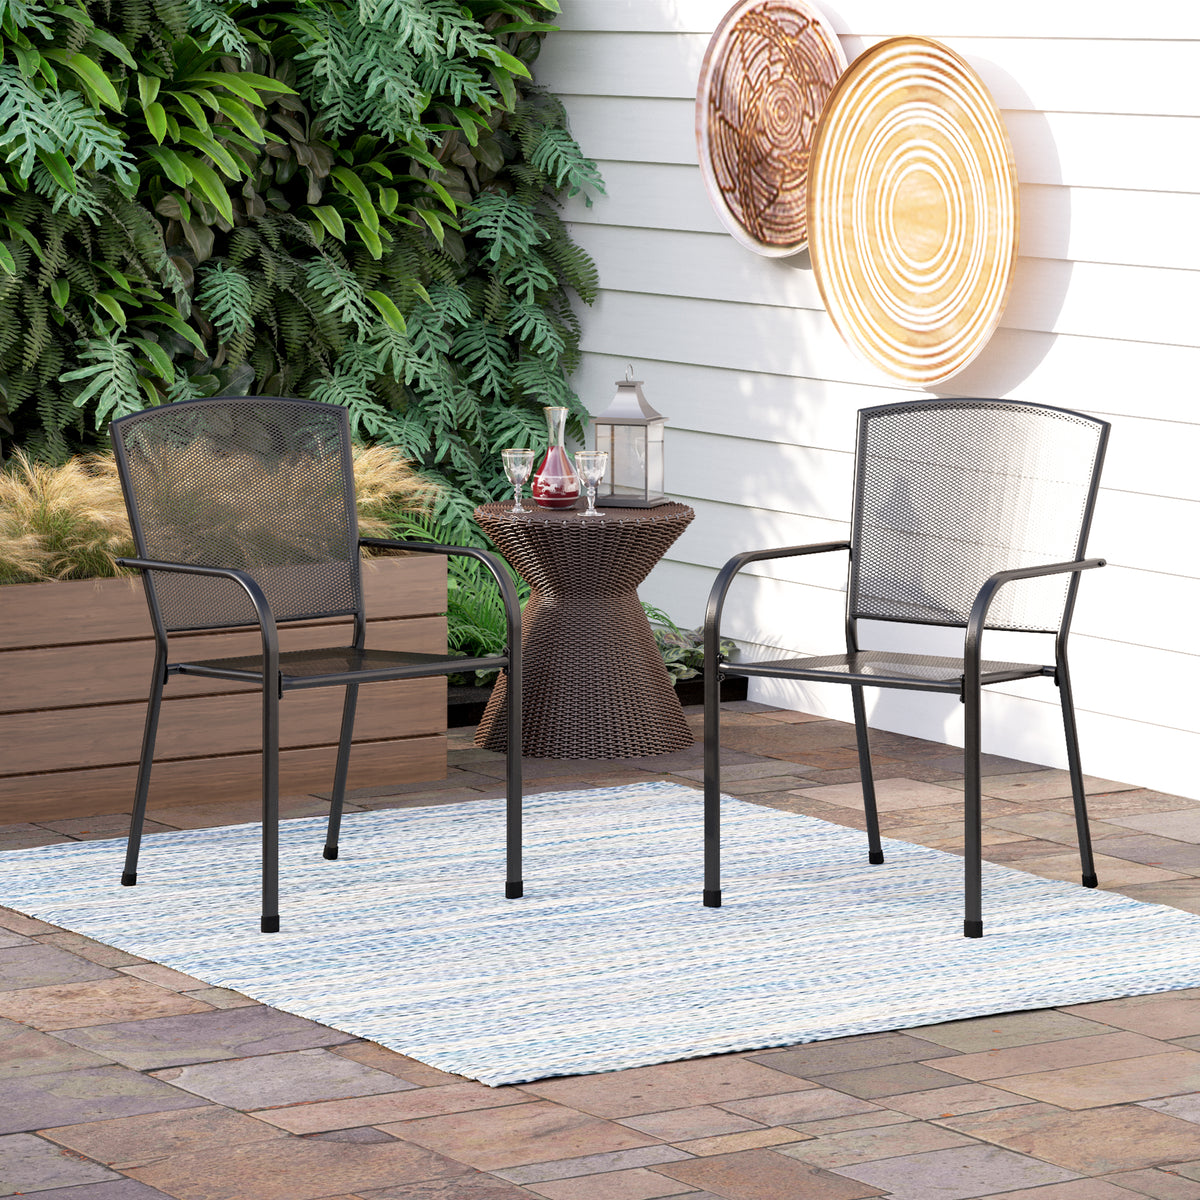 MFSTUDIO 2-Piece Patio Dining Chairs Outdoor Metal Mesh Dining Chairs